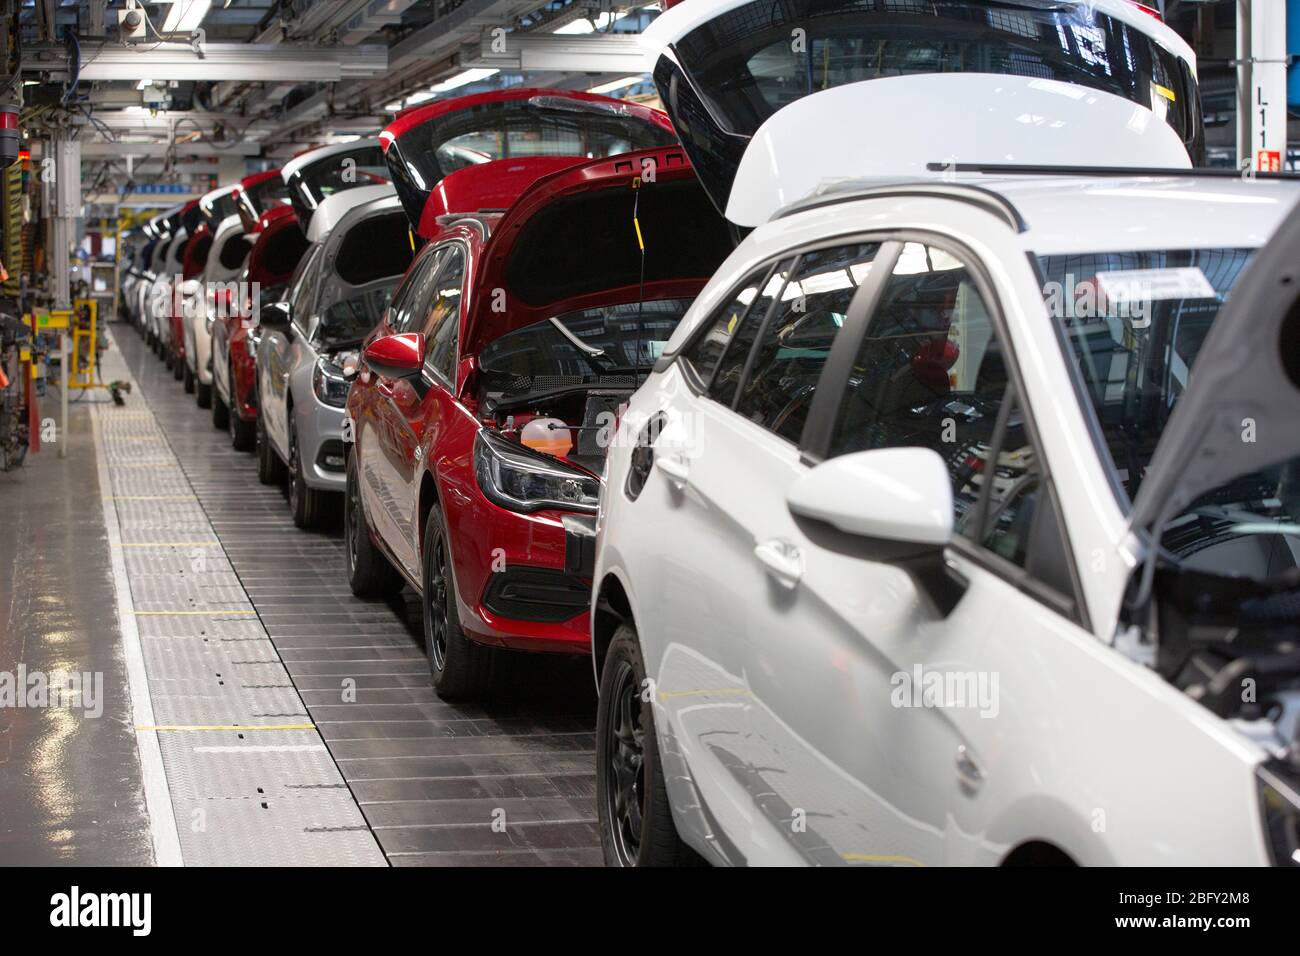 A line of cars on a car assembly line at the Vauxhall car factory during preparedness tests and redesign ahead of re-opening following the COVID-19 outbreak. Located in Ellesmere Port, Wirral, the factory opened in 1962 and currently employs around 1100 workers. It ceased production on 17 March 2020 and will only resume work upon the advice of the UK Government, which will involve stringent physical distancing measures being in place across the site. Stock Photo